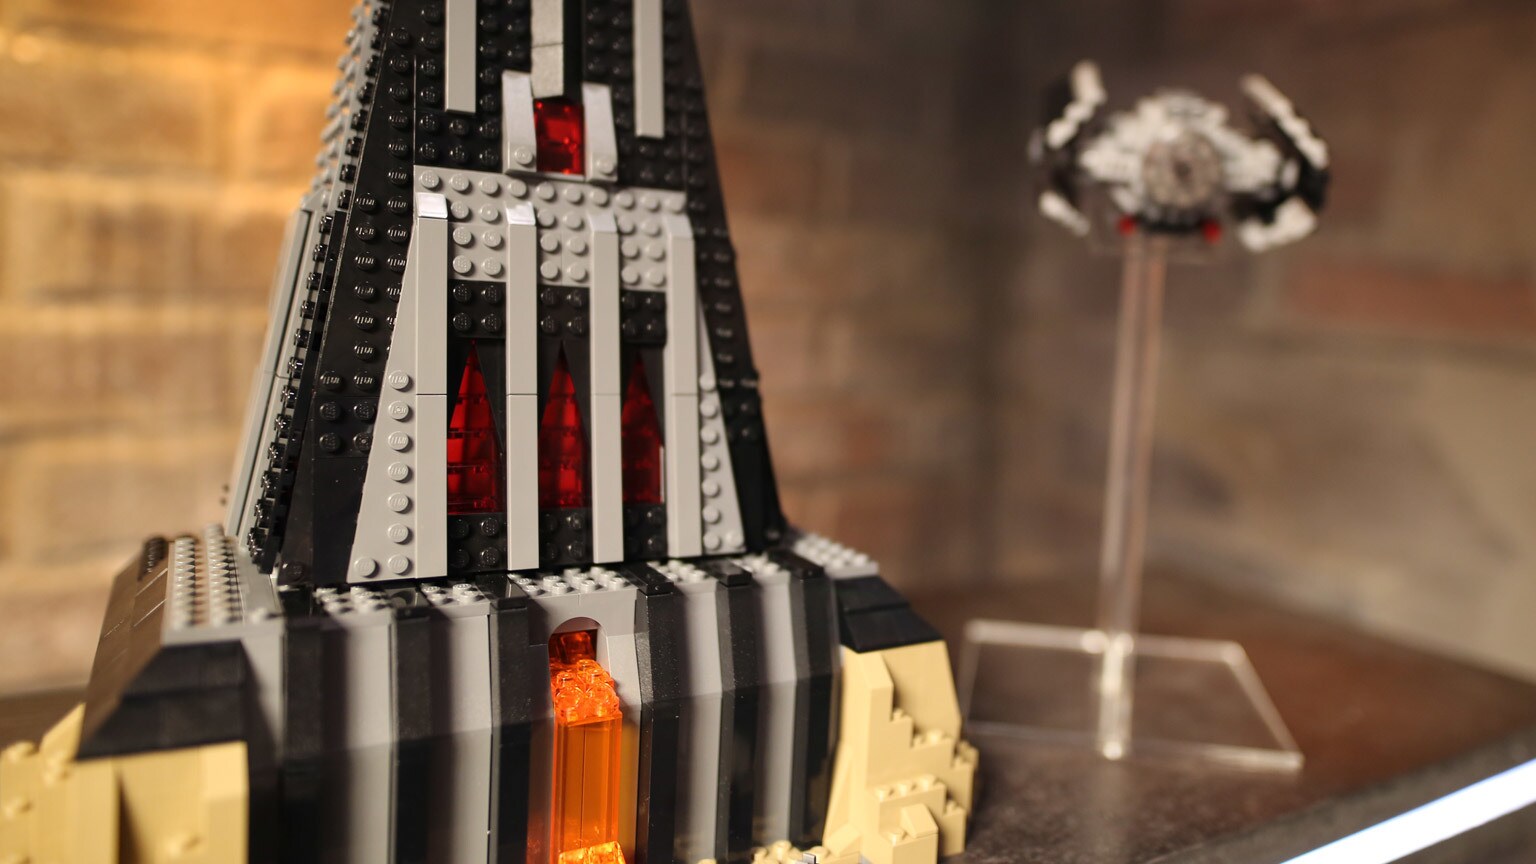 The Last Jedi LEGO Sets: First Look for Force Friday - The Joys of